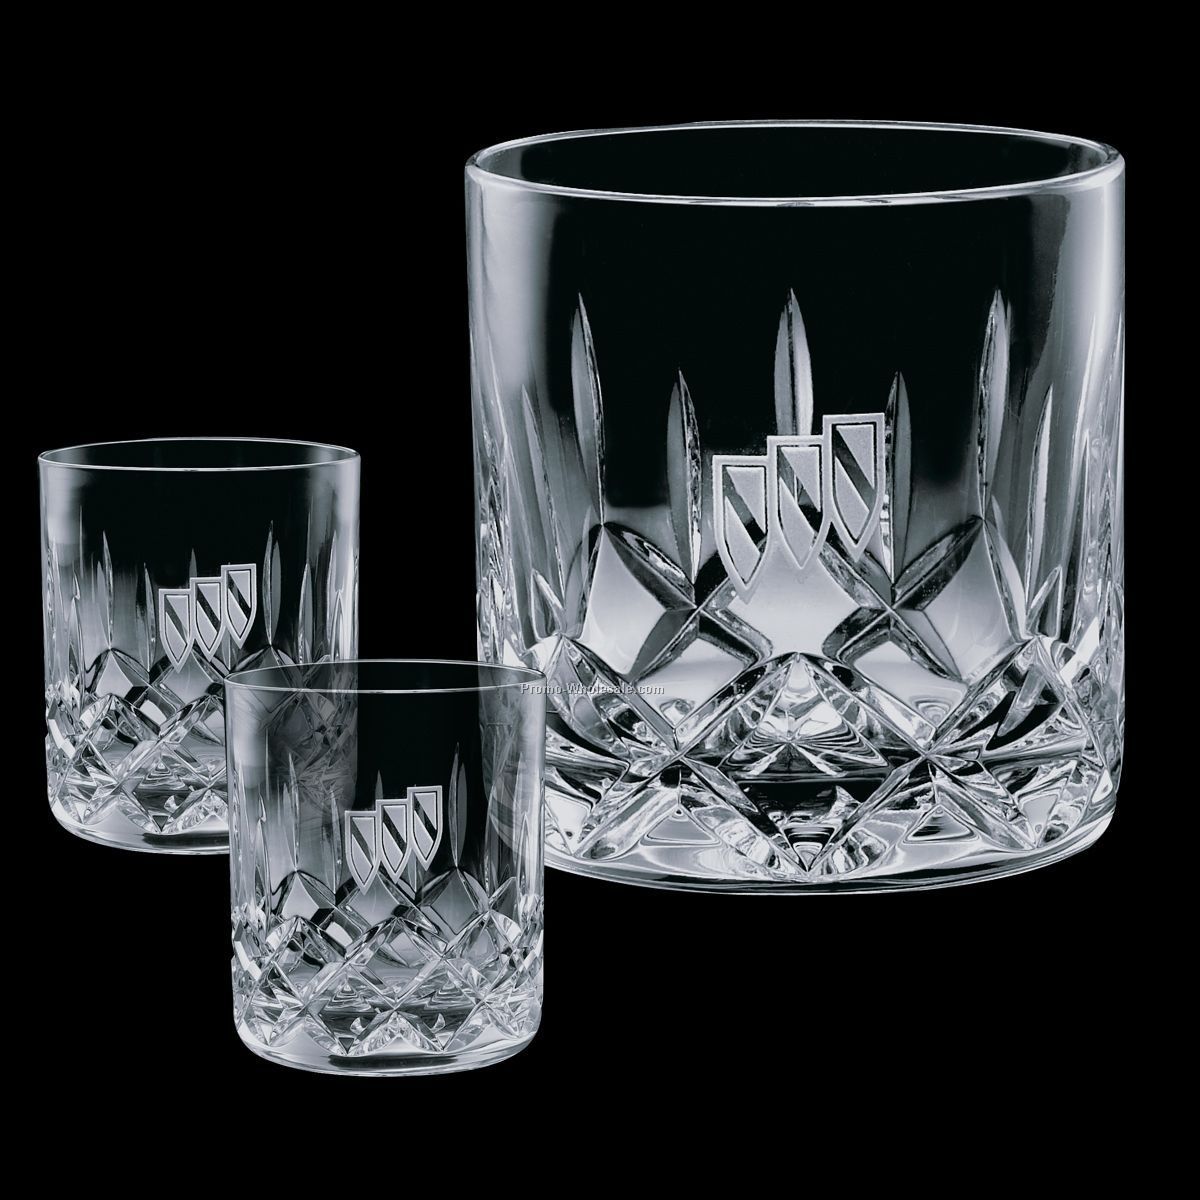 7" Crystal Denby Ice Bucket And 2 On-the-rocks Glasses